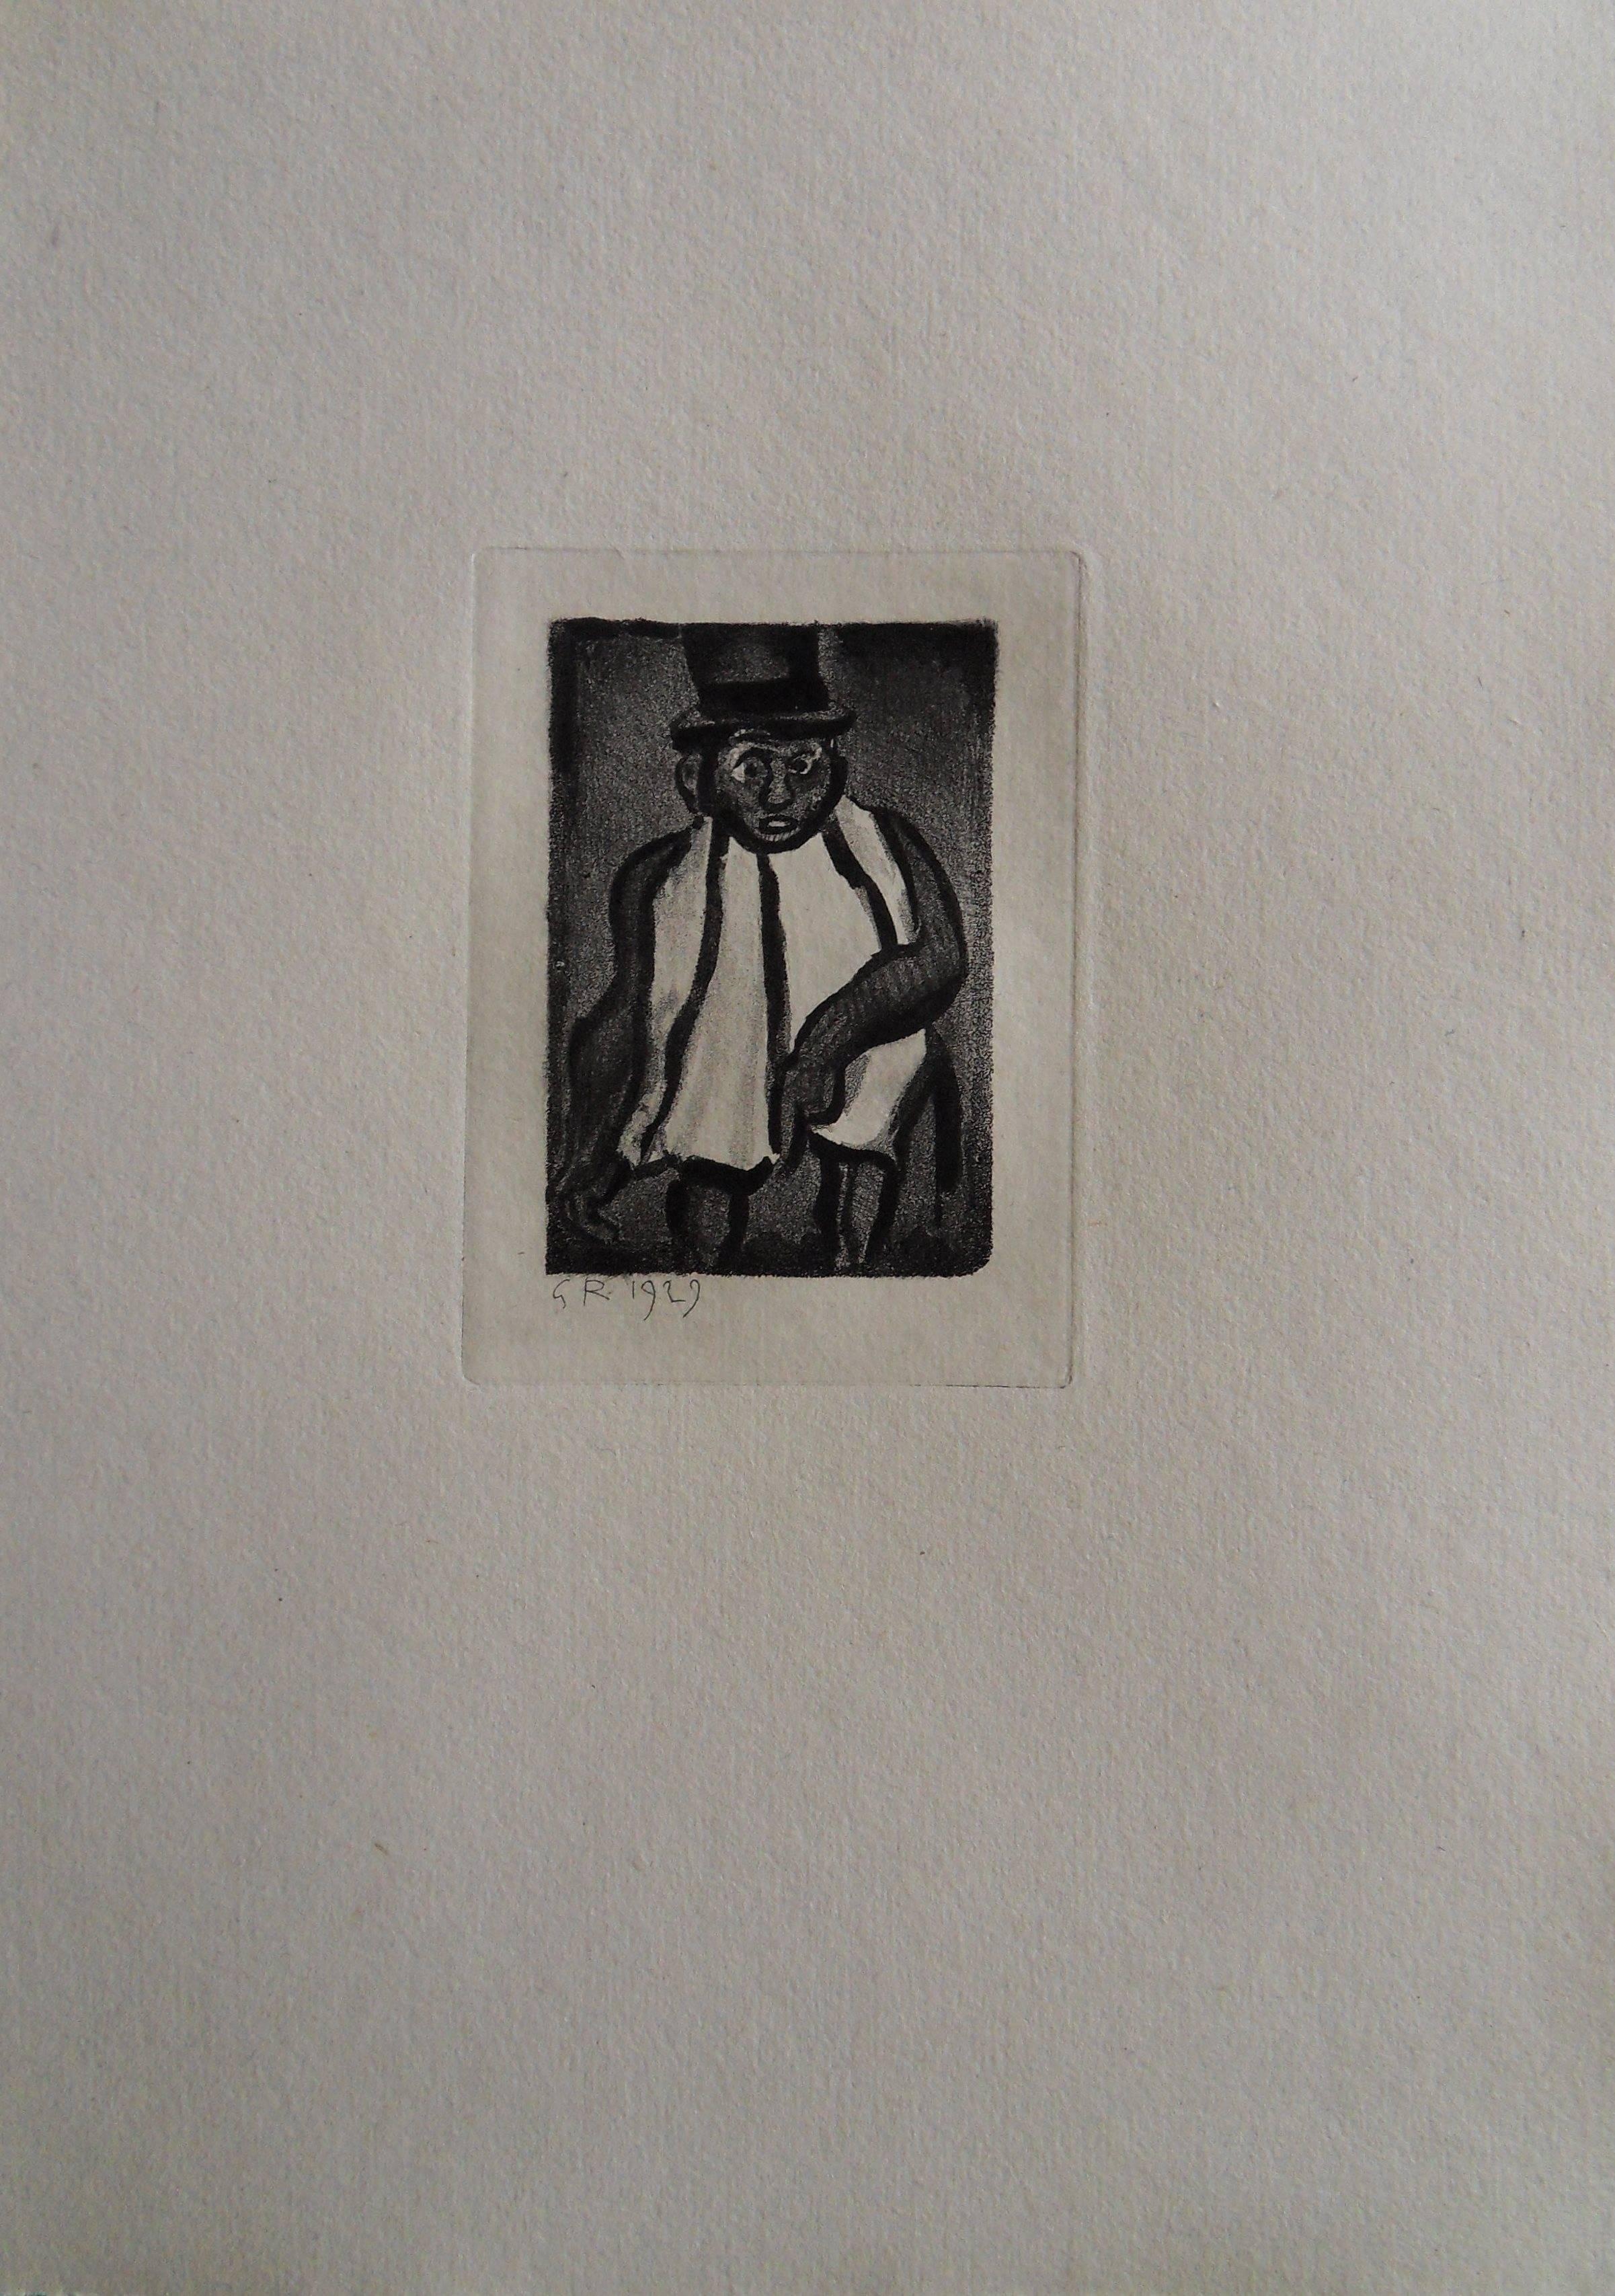 Elegant Man with a Top Hat - Original etching - 1929 - Realist Print by Georges Rouault